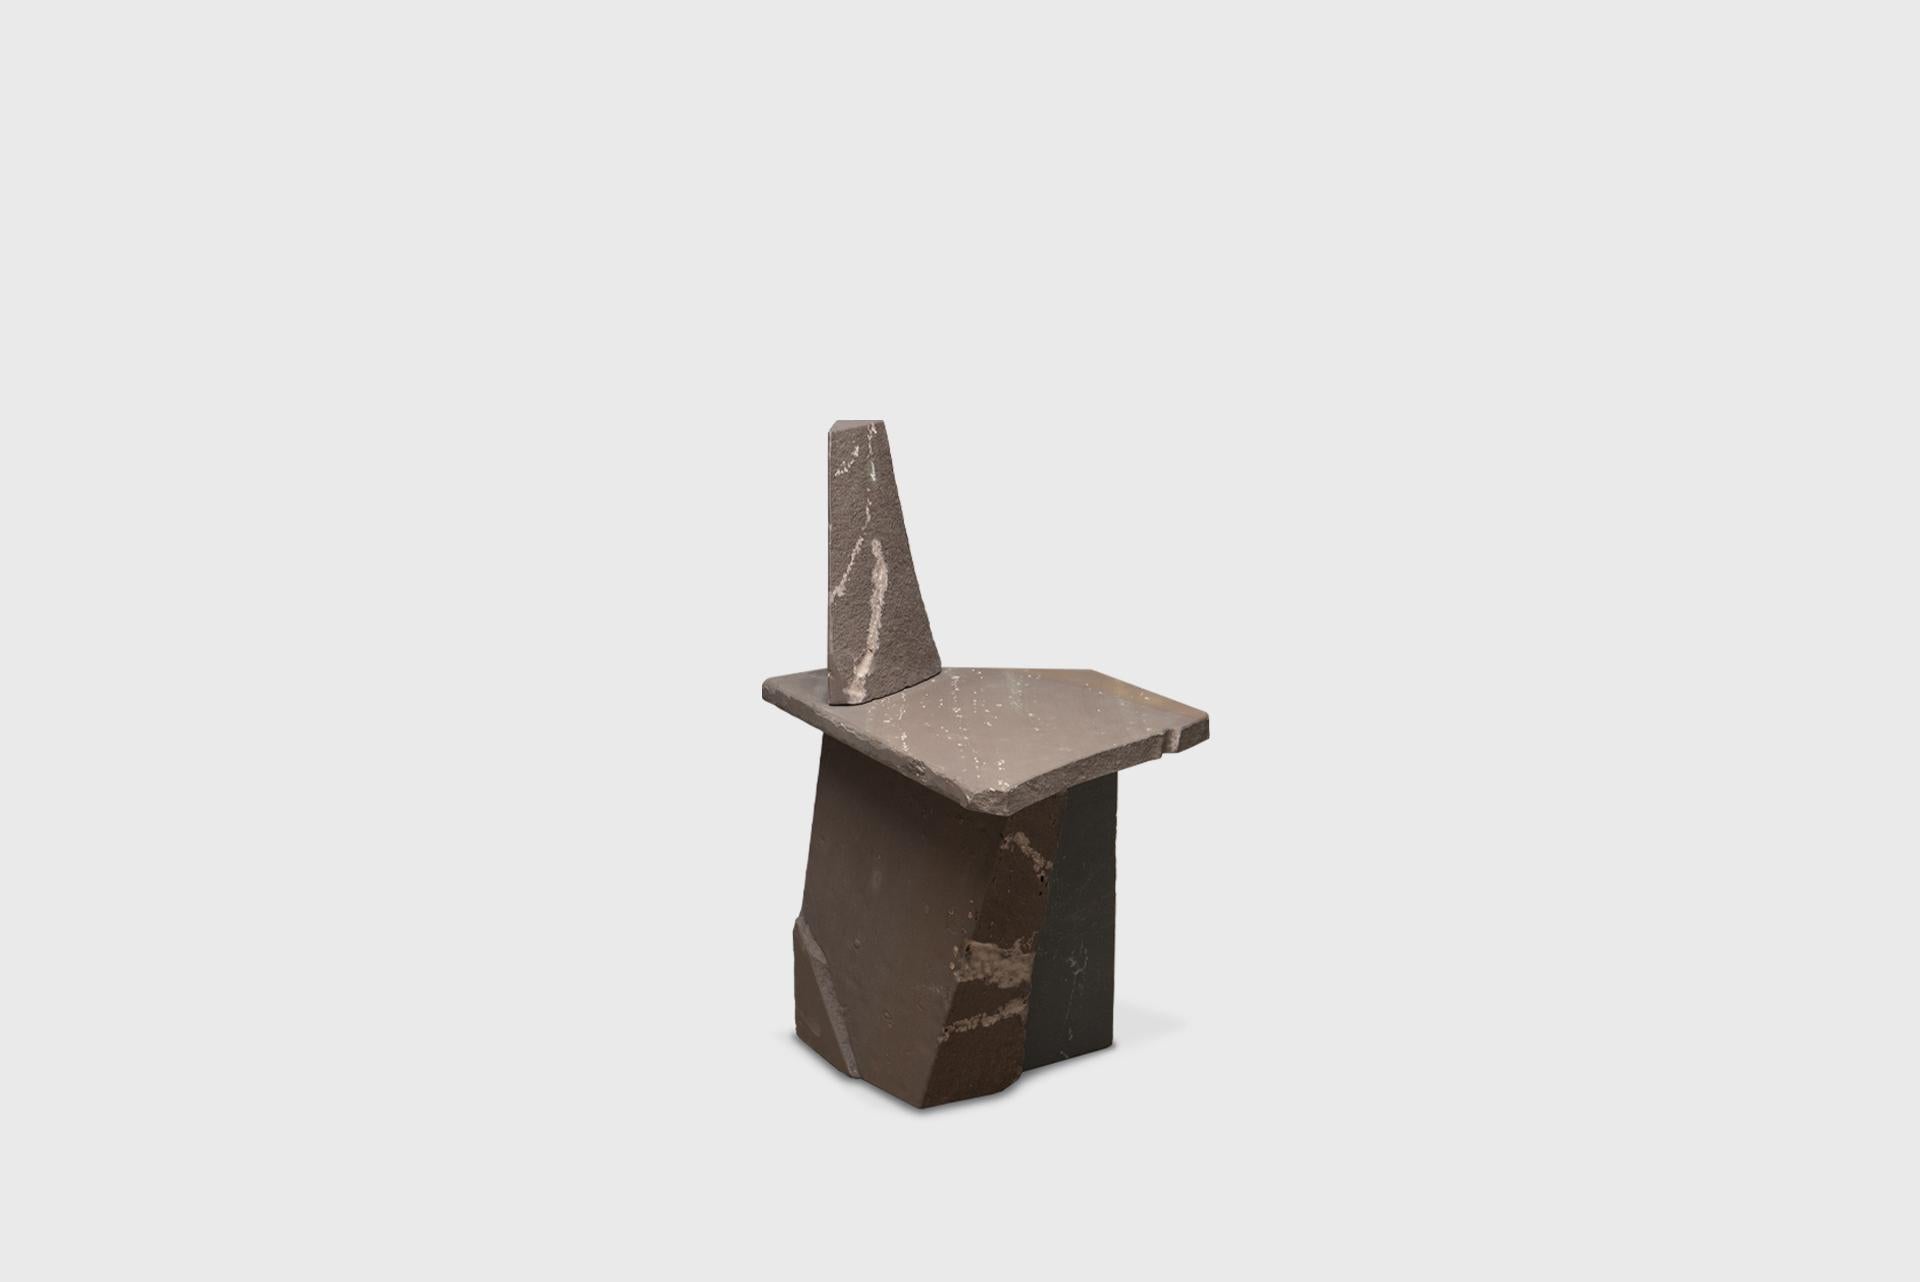 Contemporary Natural Chair 13, Graywacke Offcut Gray Stone, Carsten in der Elst For Sale 6